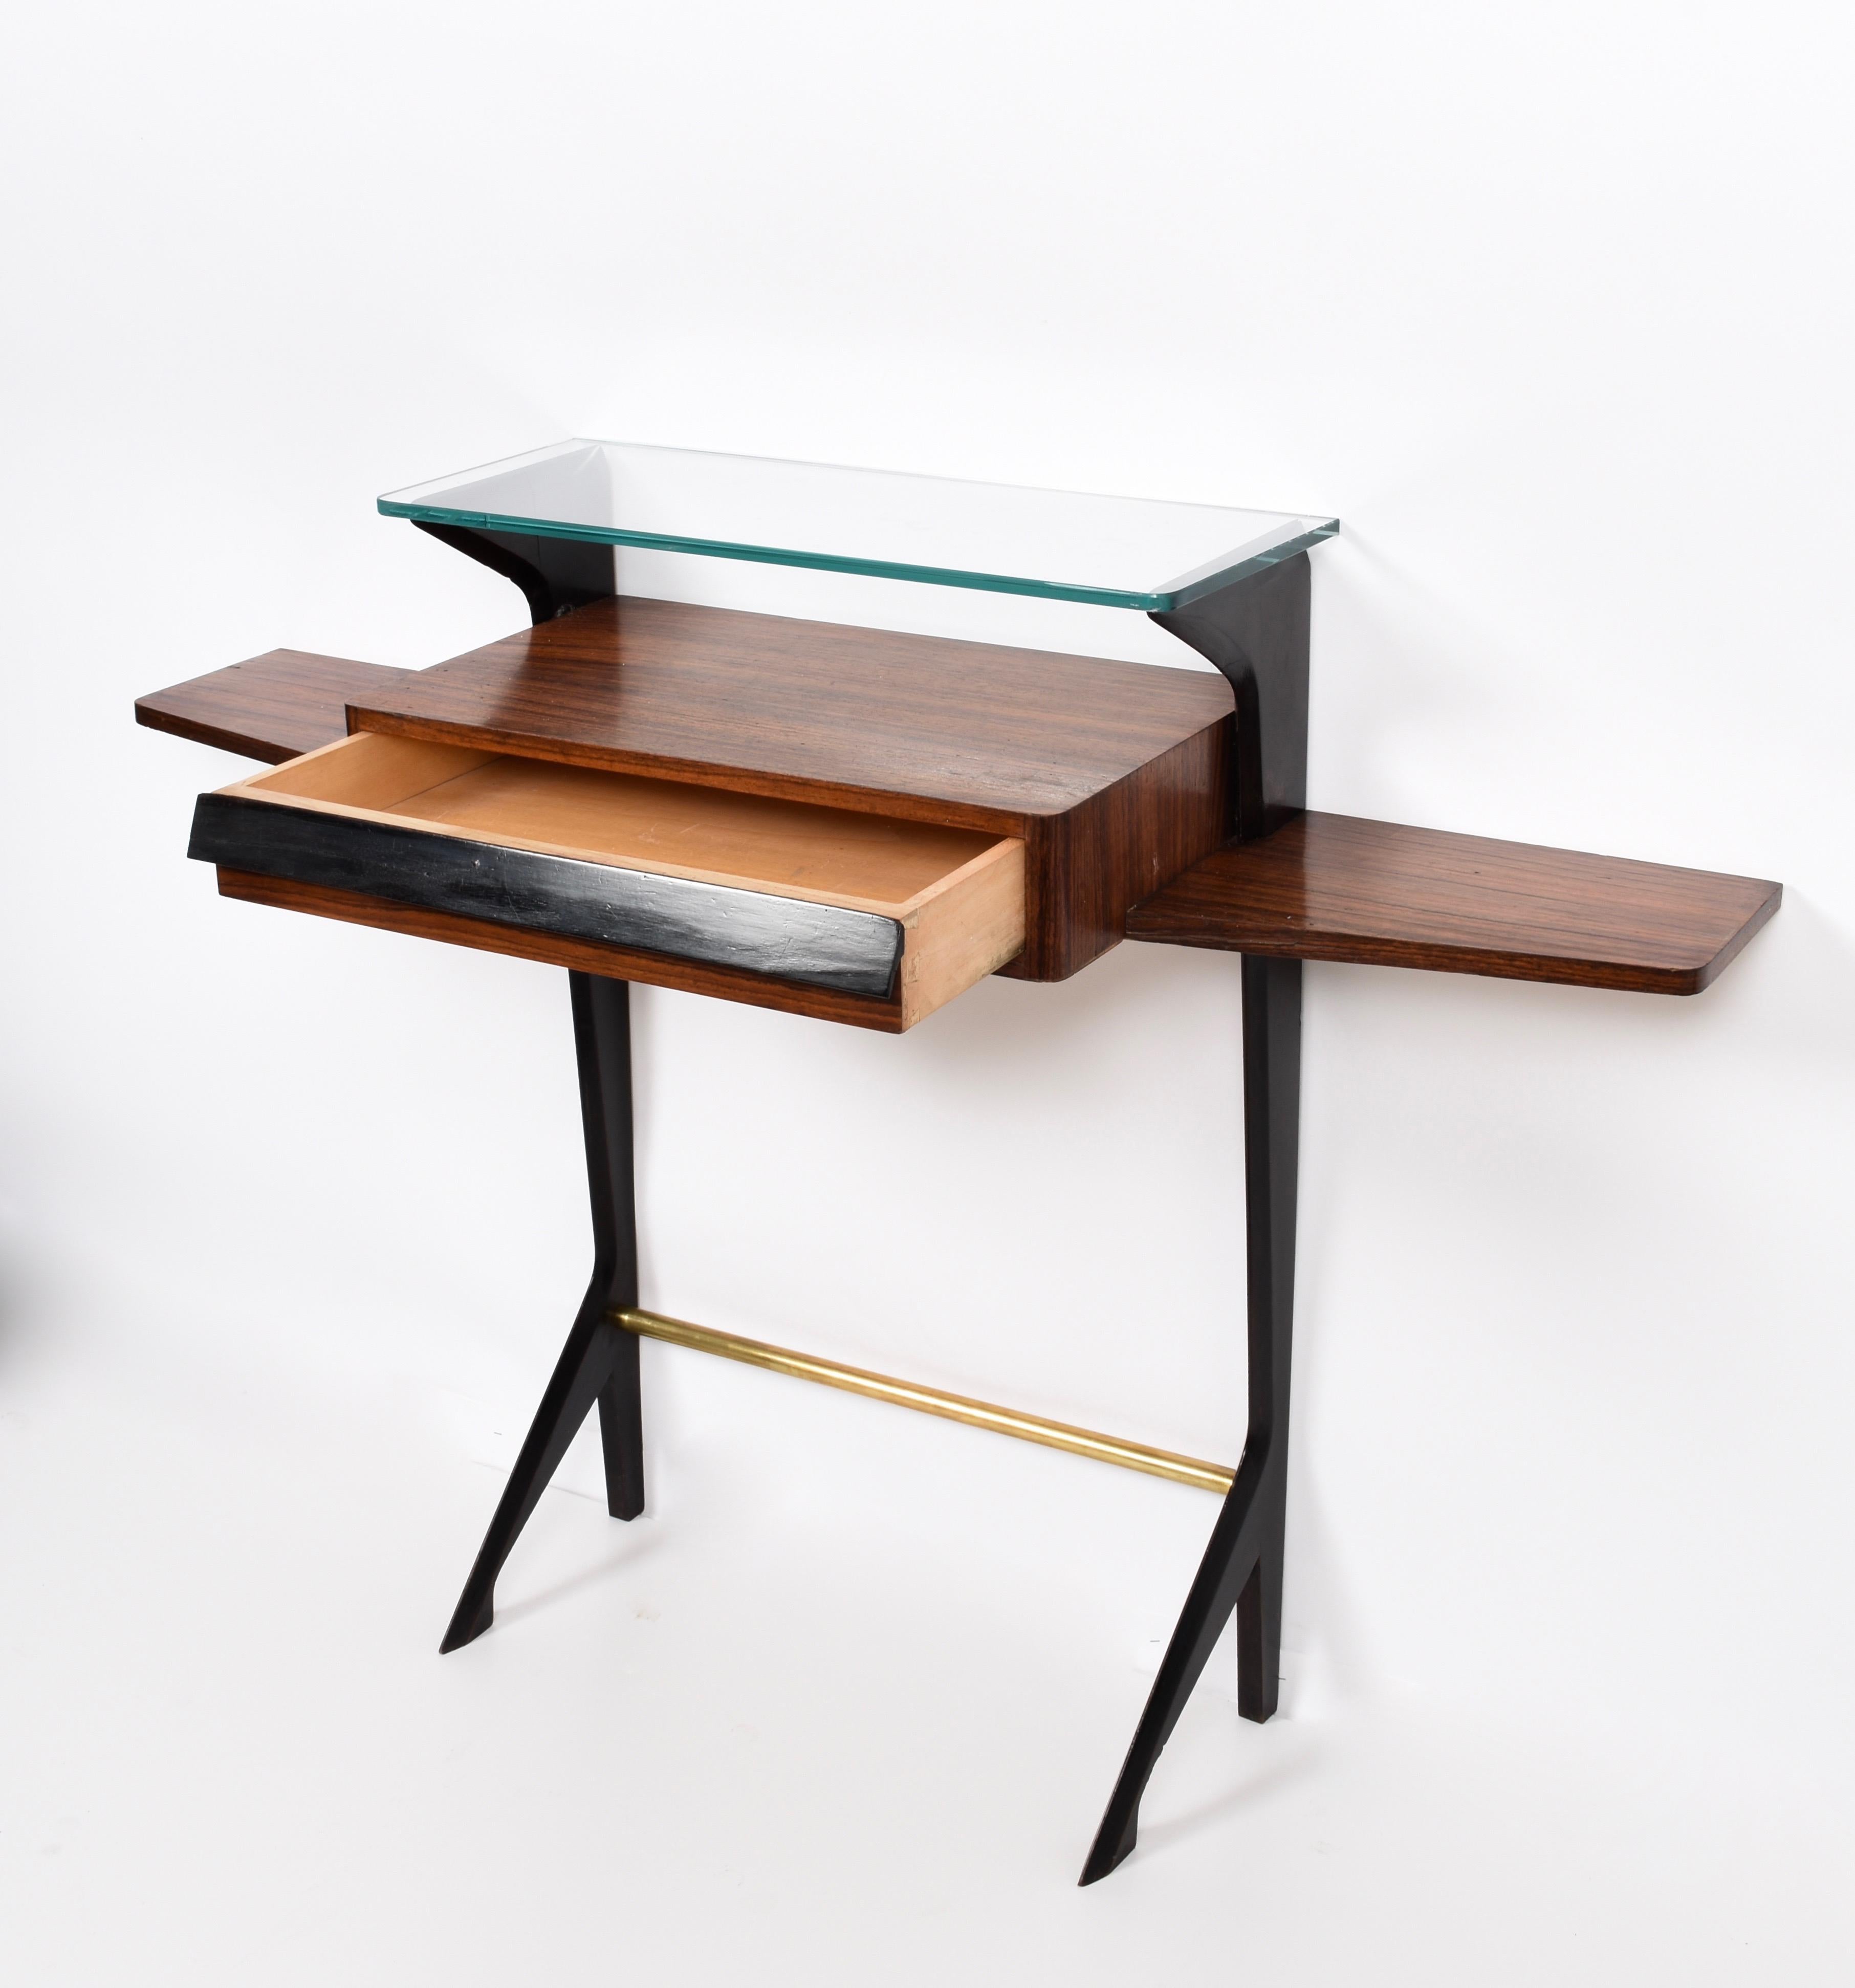 Lacquered Ico Parisi Midcentury Wood, Brass and Glass Italian Console Table, 1950s